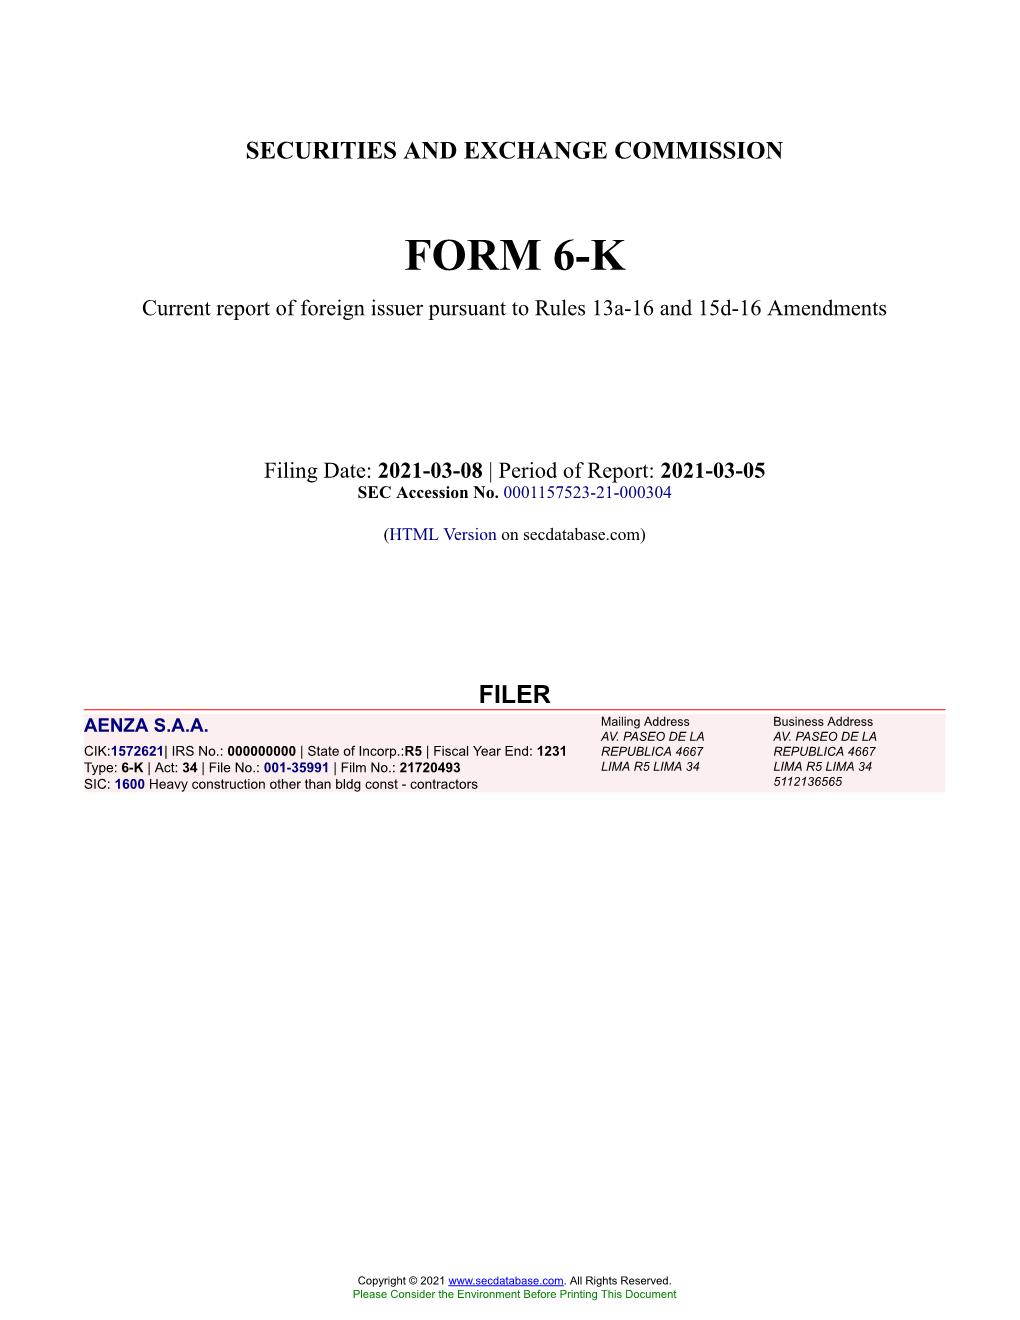 AENZA S.A.A. Form 6-K Current Event Report Filed 2021-03-08